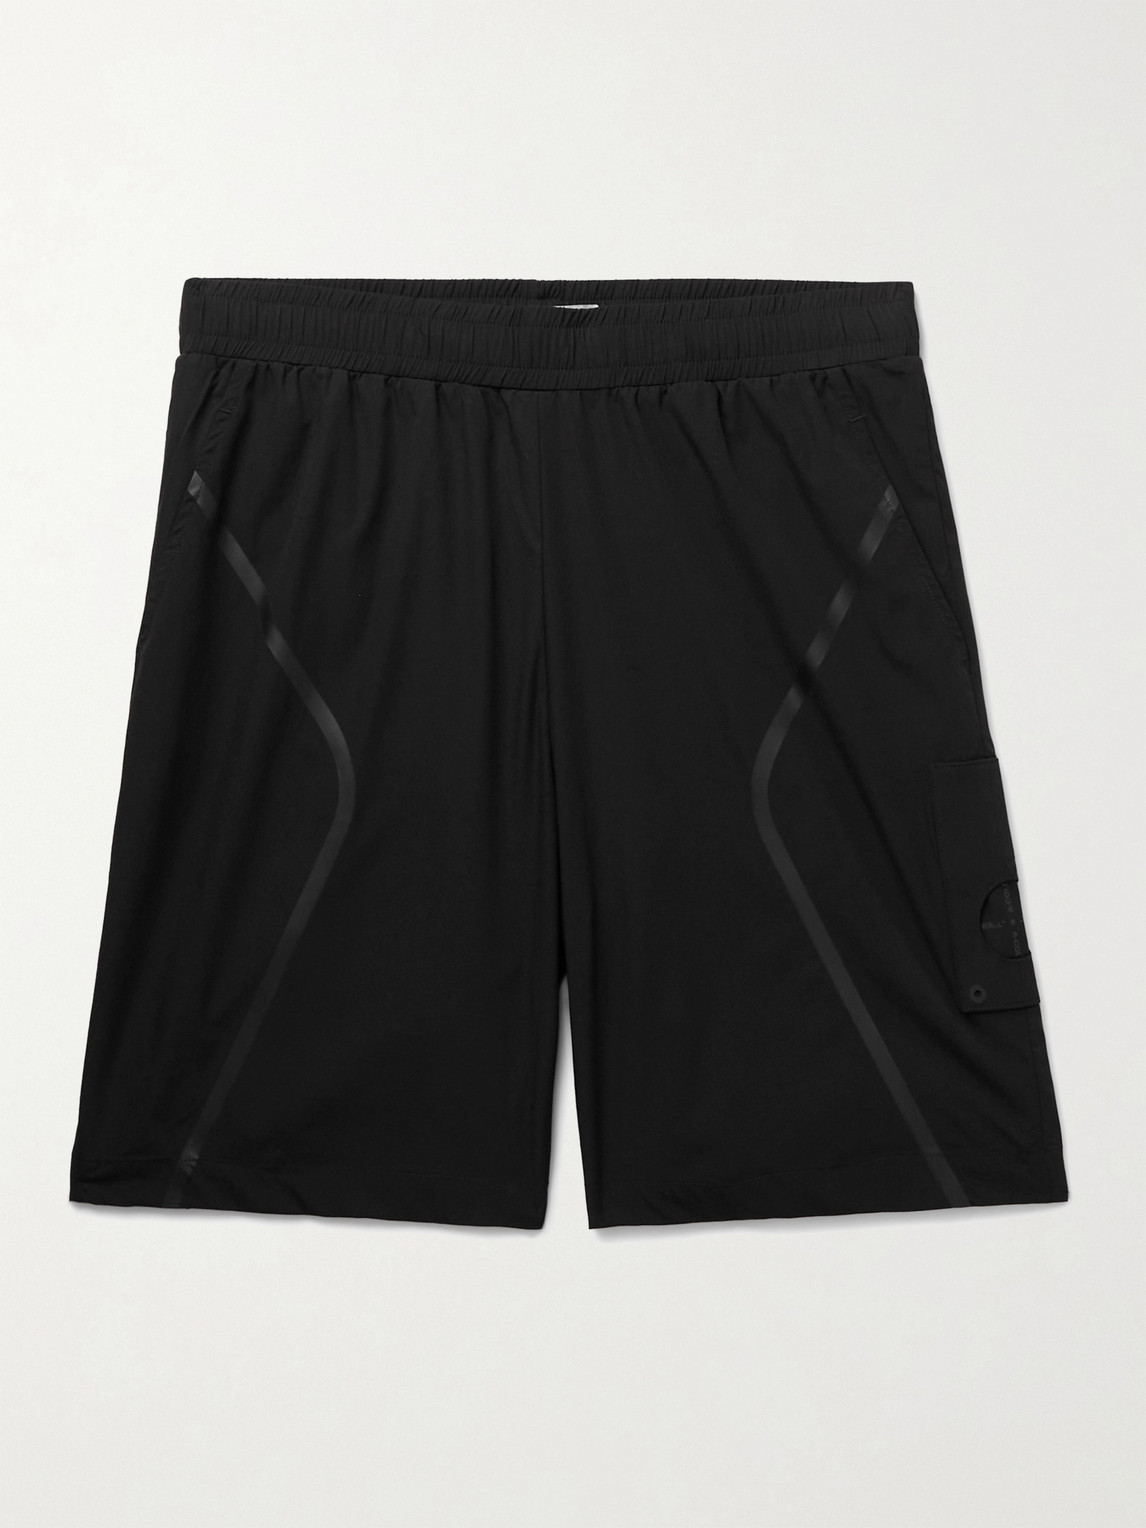 A-COLD-WALL* WELDED CORBUSIER STRETCH-NYLON SHORTS